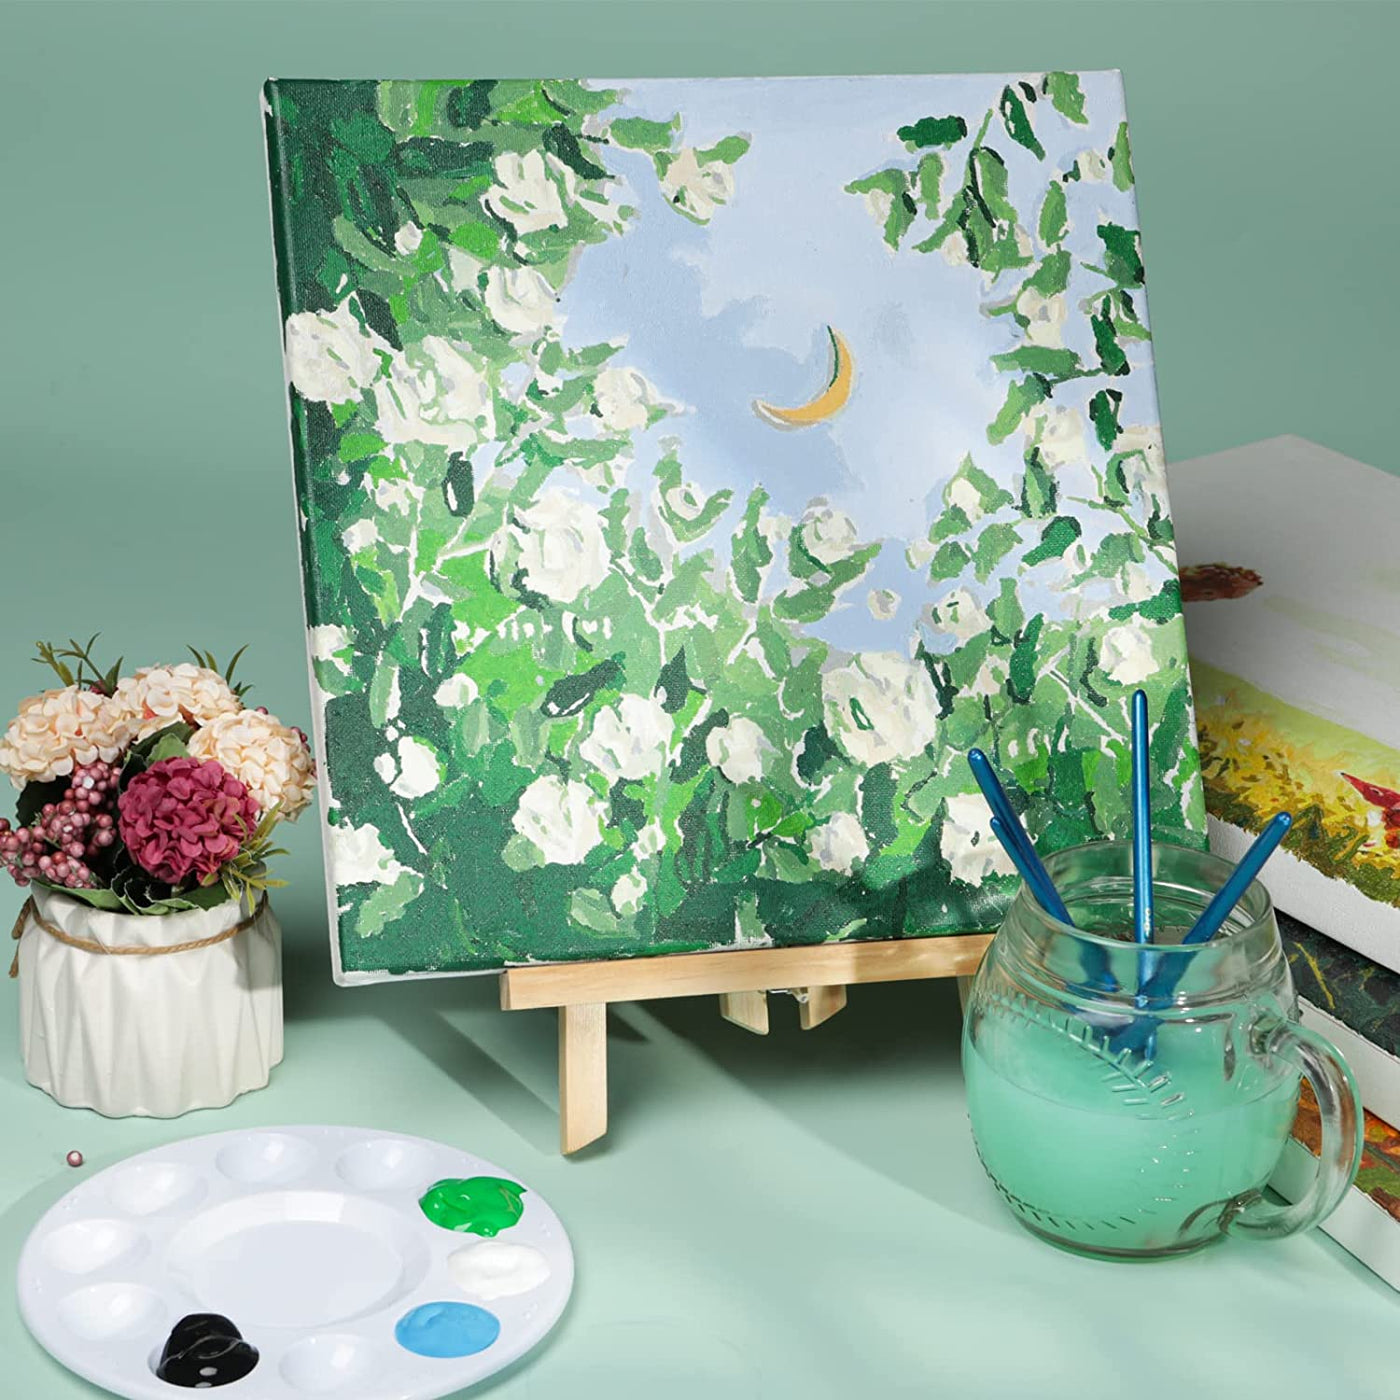 72 PCS Painting Set with Easel